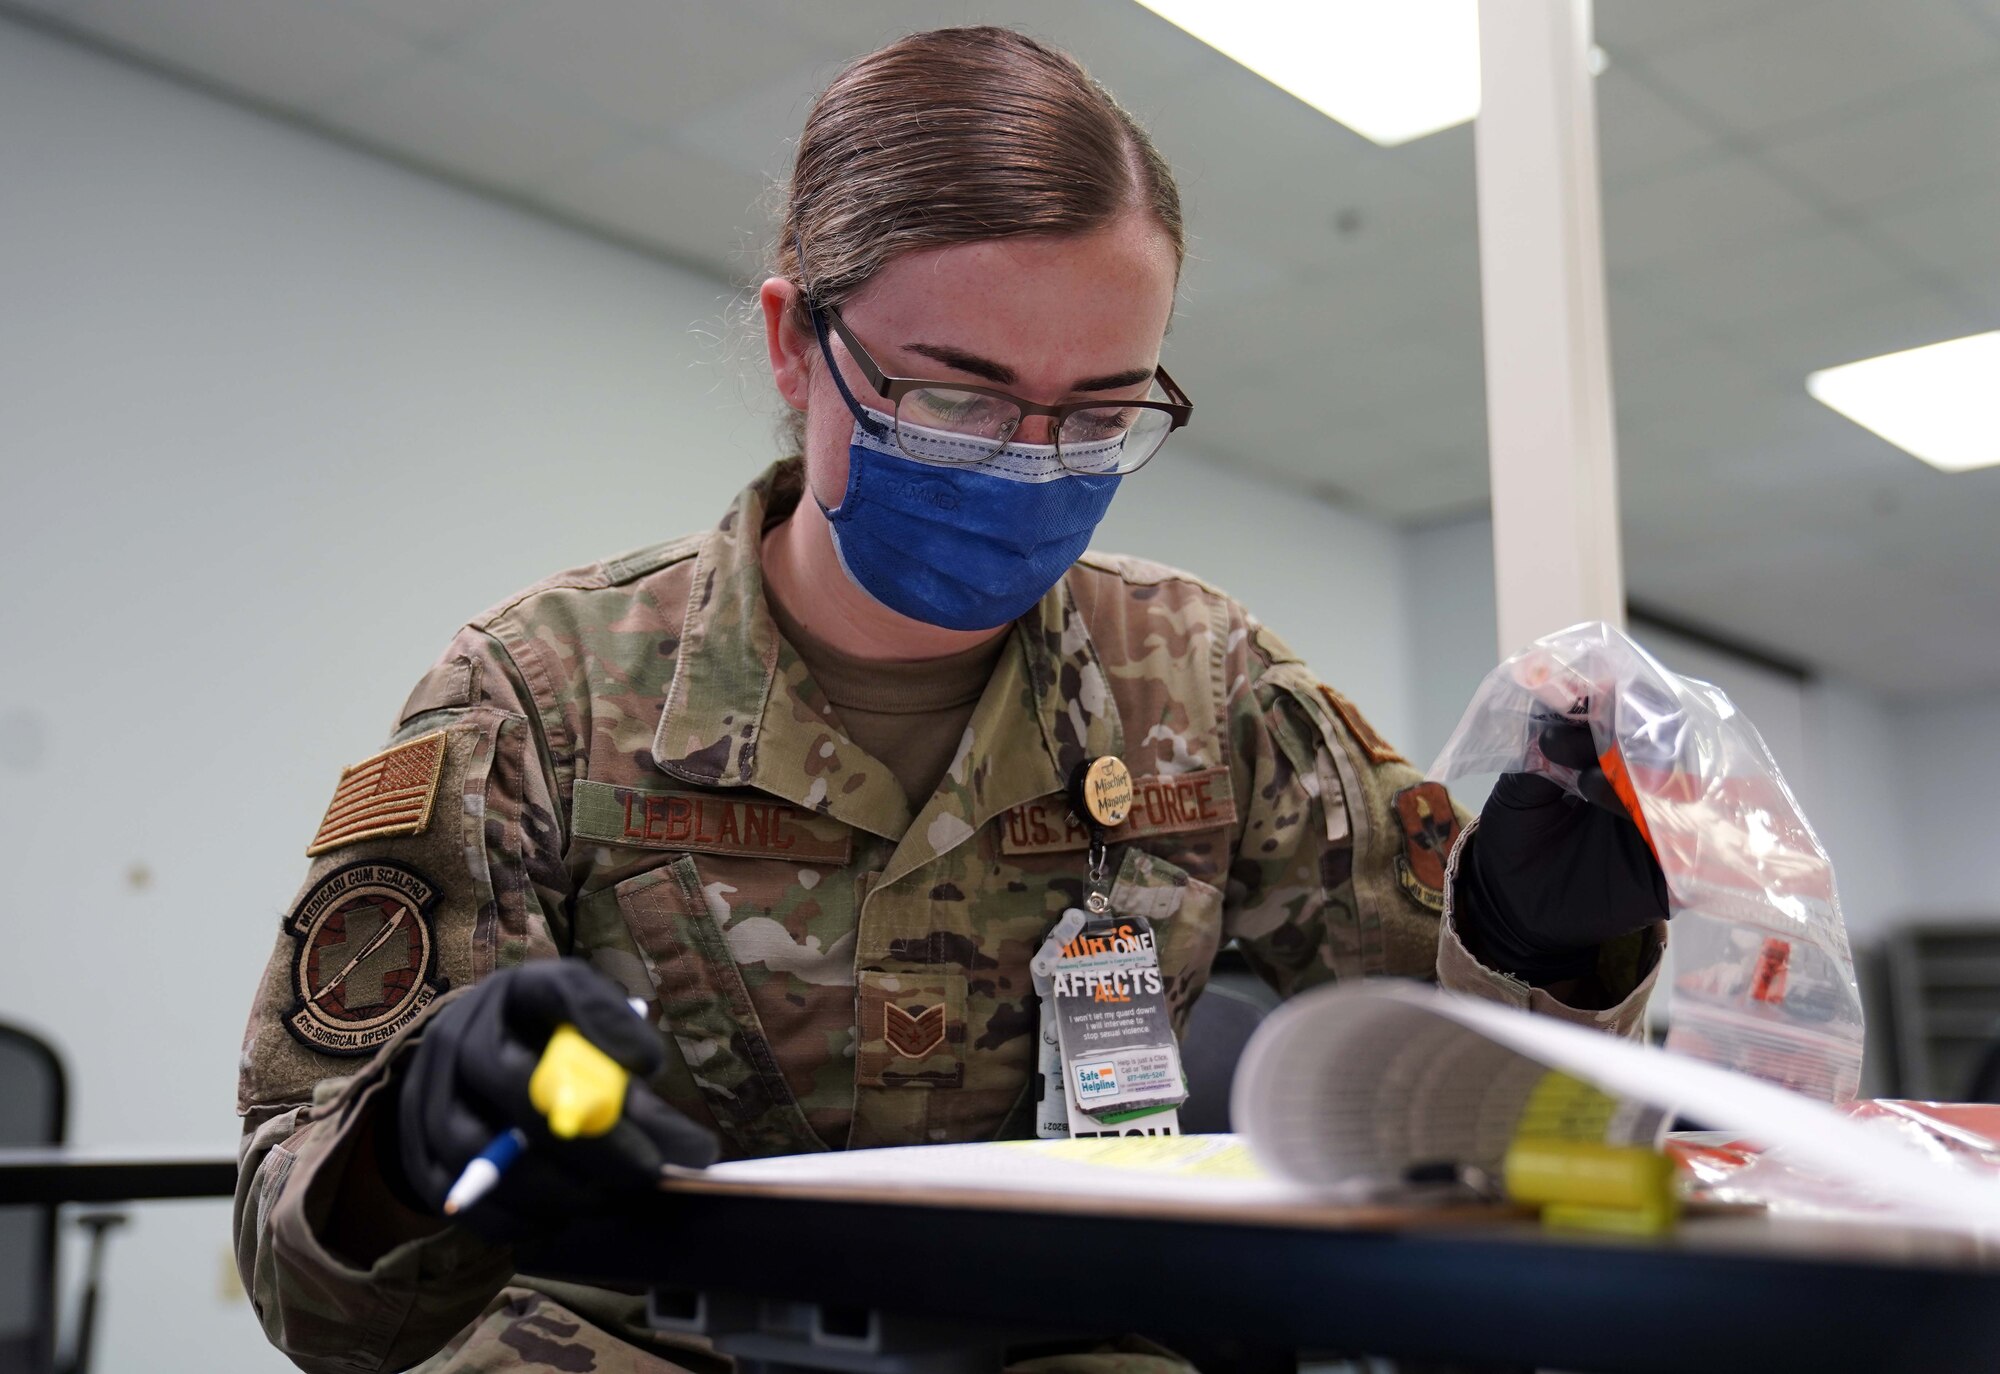 U.S. Air Force Staff Sgt. Taylor Leblanc, 81st Surgical Operations Squadron medical technician, records samples taken for COVID-19 testing at the Combat Readiness Training Center in Gulfport, Mississippi, July 14, 2020. Airmen from Keesler Air Force Base assisted in testing over 900 Sailors as a part of the joint and total force effort across Navy and Air Force active duty and guard installations along the Gulf Coast. (U.S. Air Force photo by Airman 1st Class Kimberly L. Mueller)